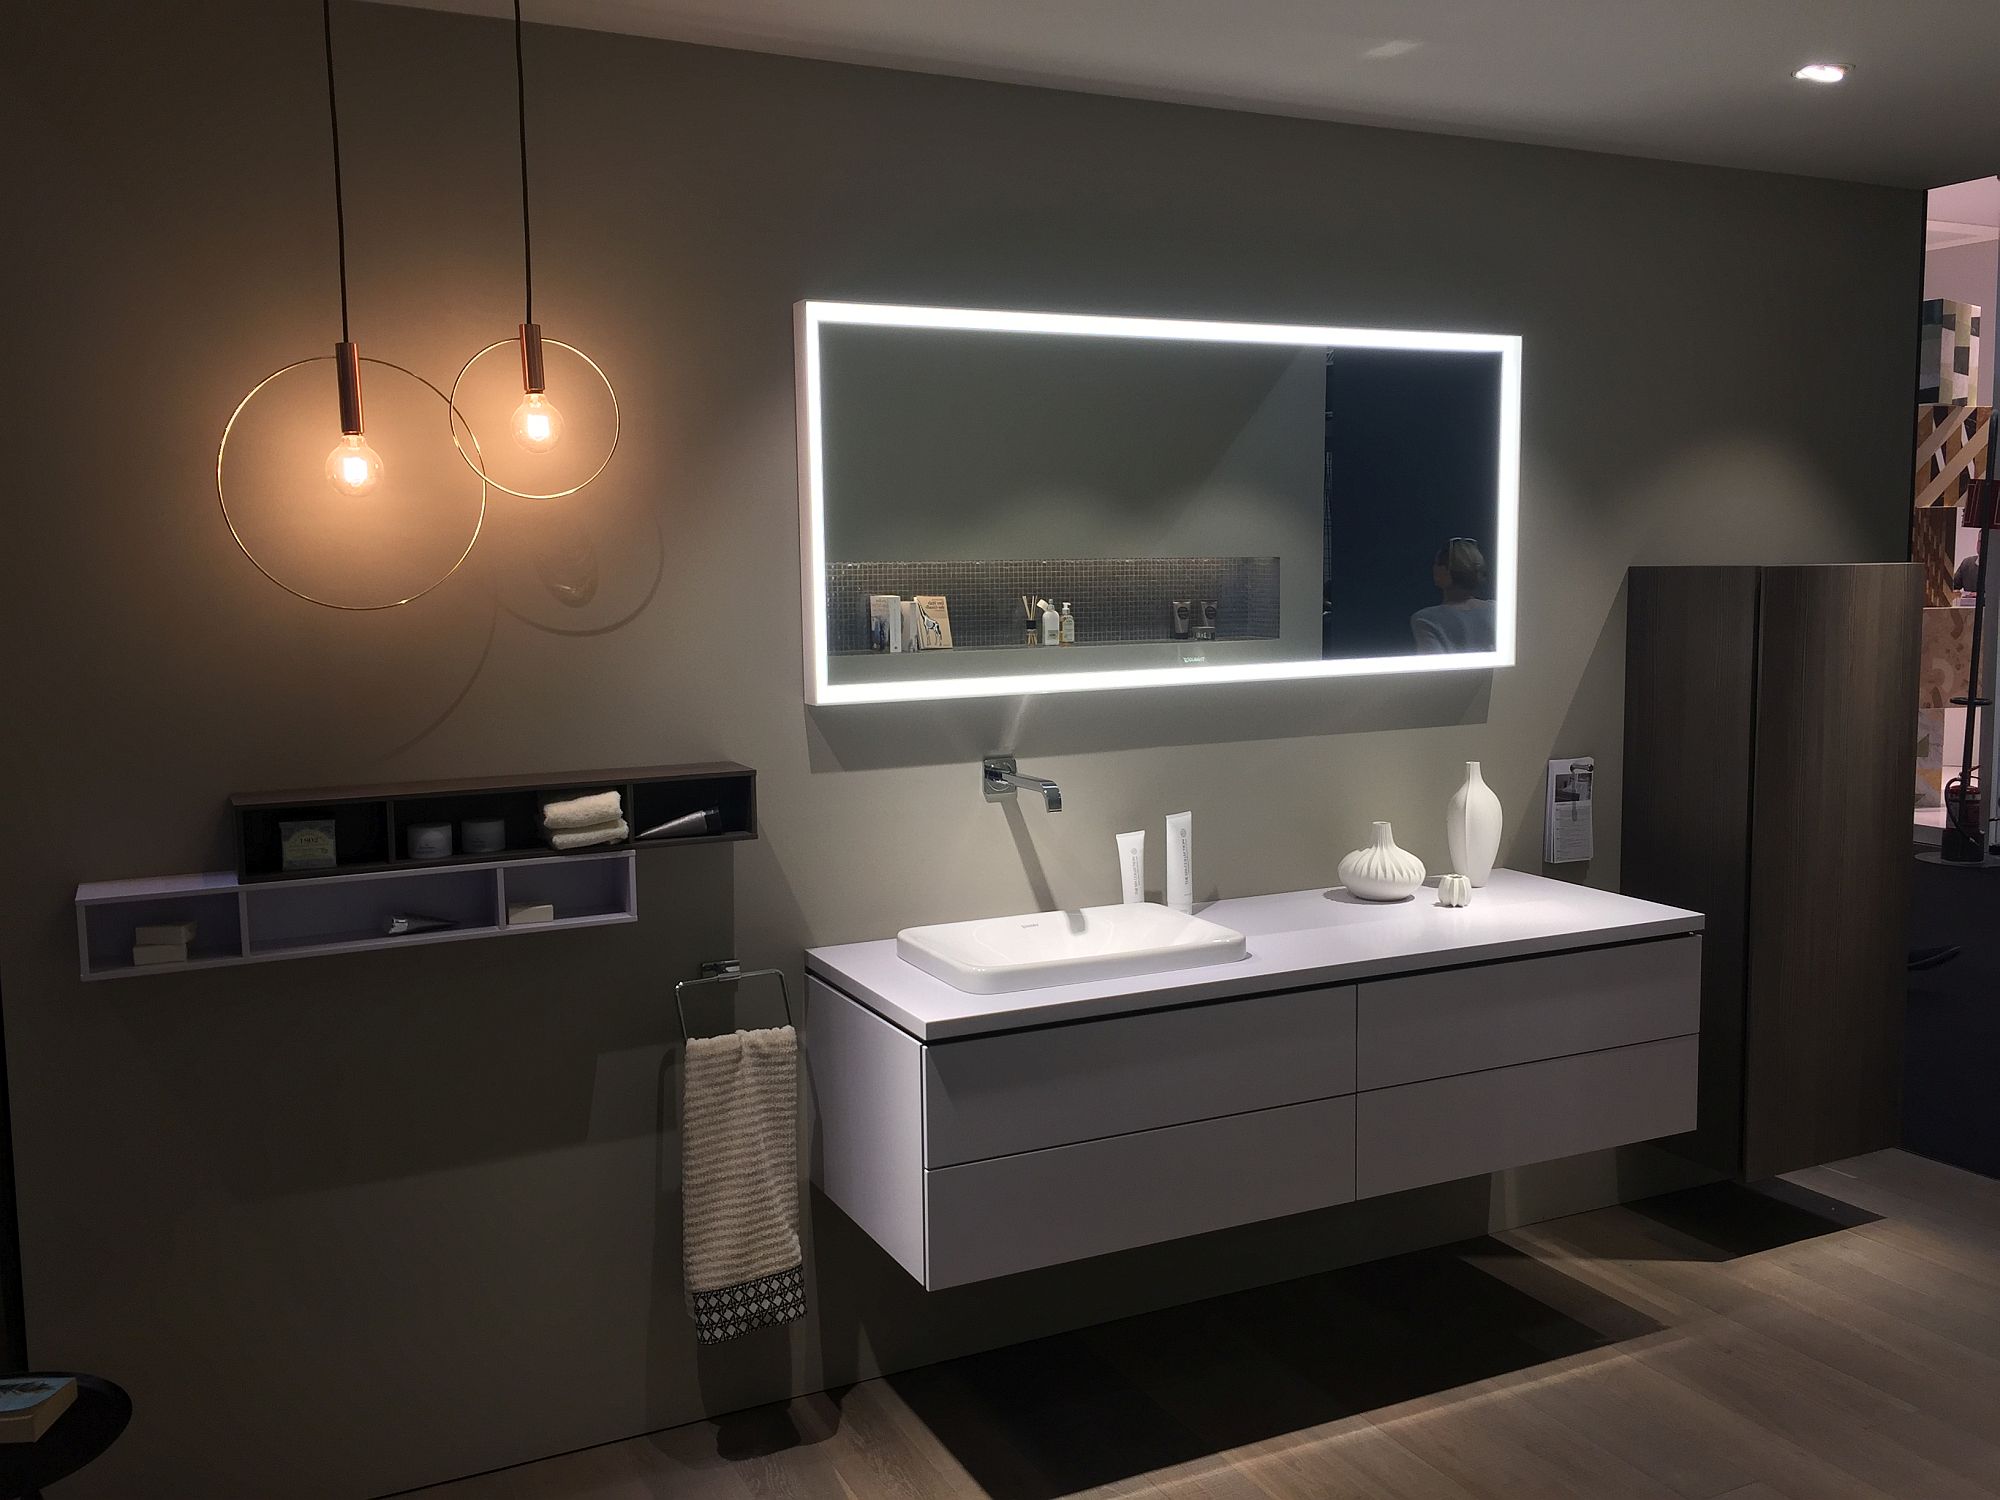 LED-strip-lighting-transforms-the-amnbiance-of-the-bathroom-completely